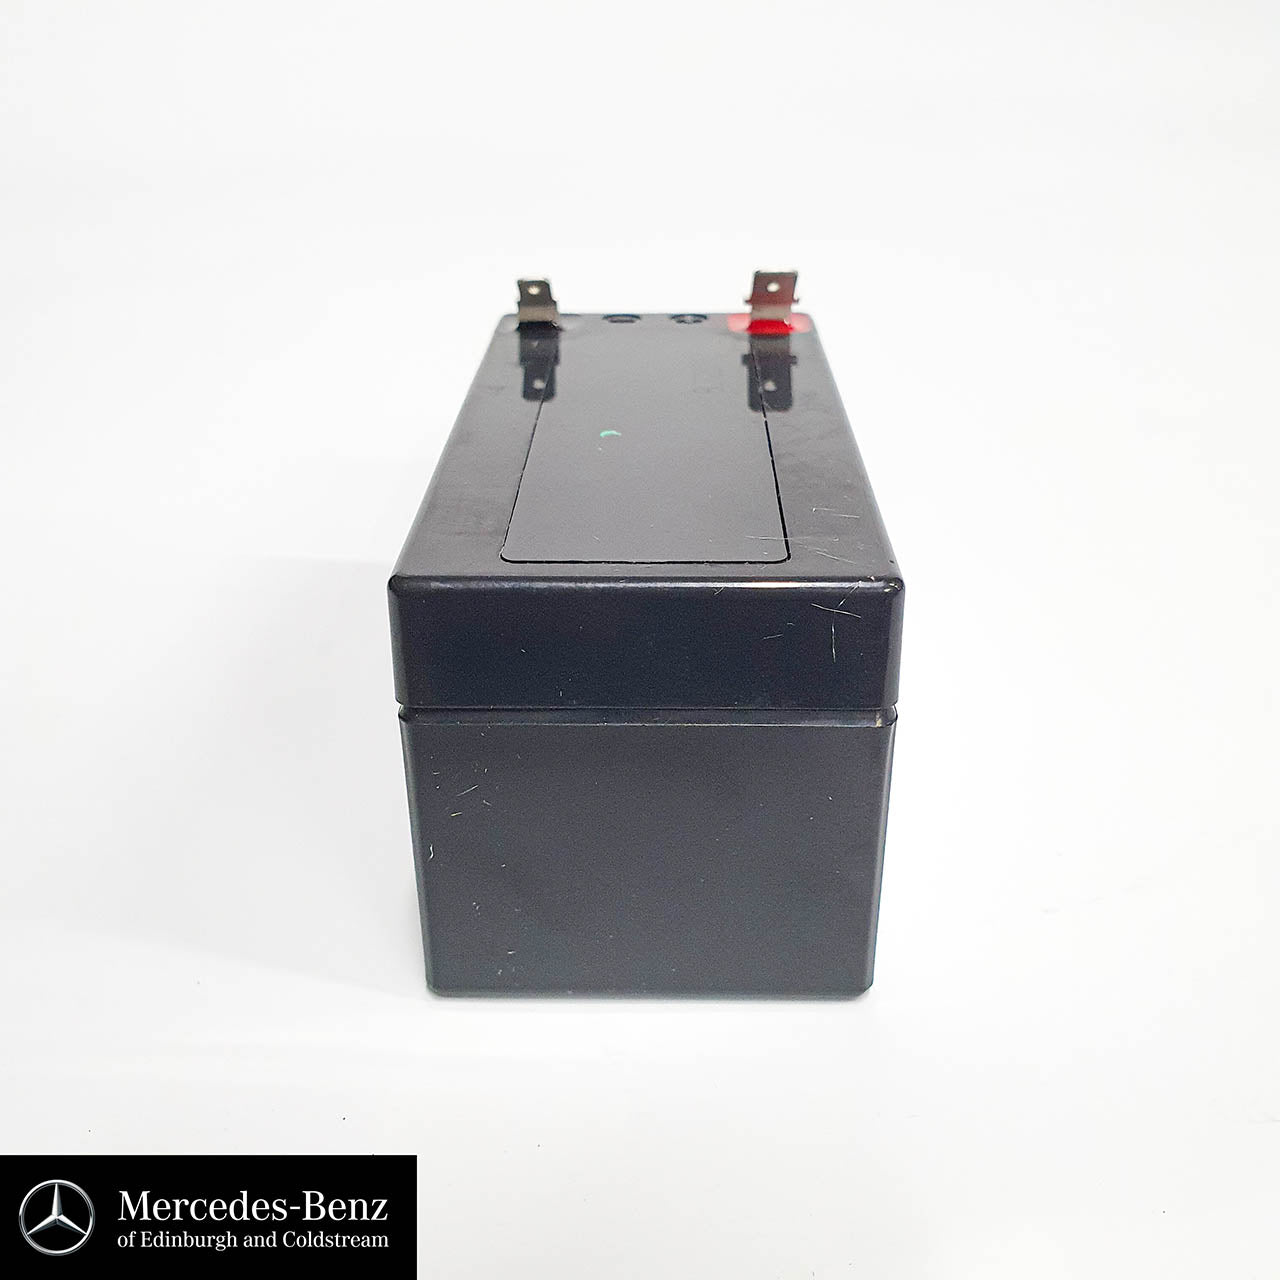 Genuine Mercedes-Benz auxiliary battery, electrical System battery 12V 1.2AH